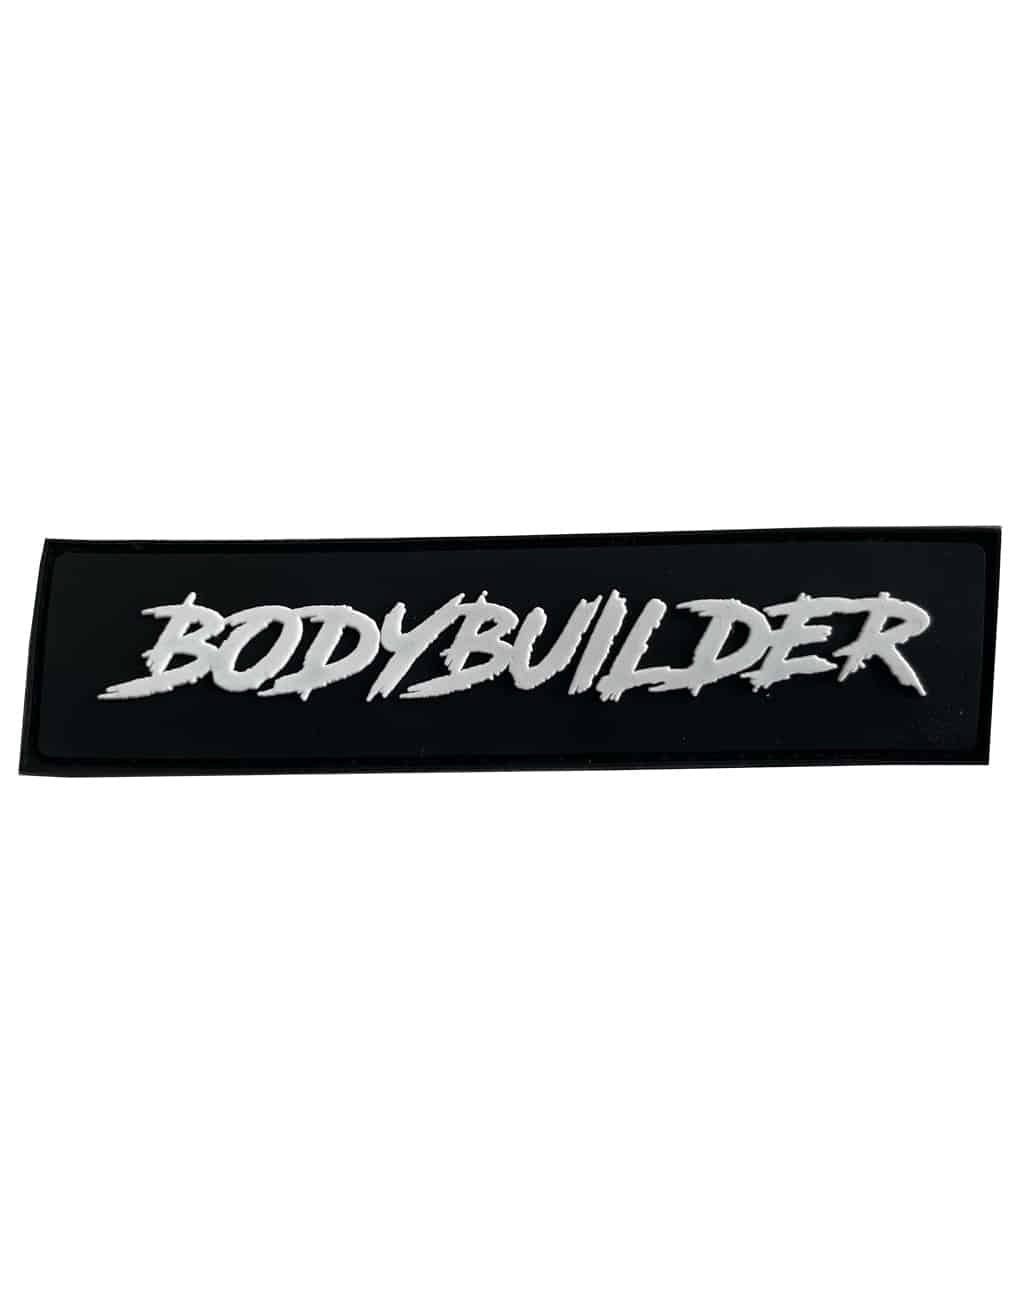 Bodybuilder Velcro patch / patch - For bodybuilding backpack